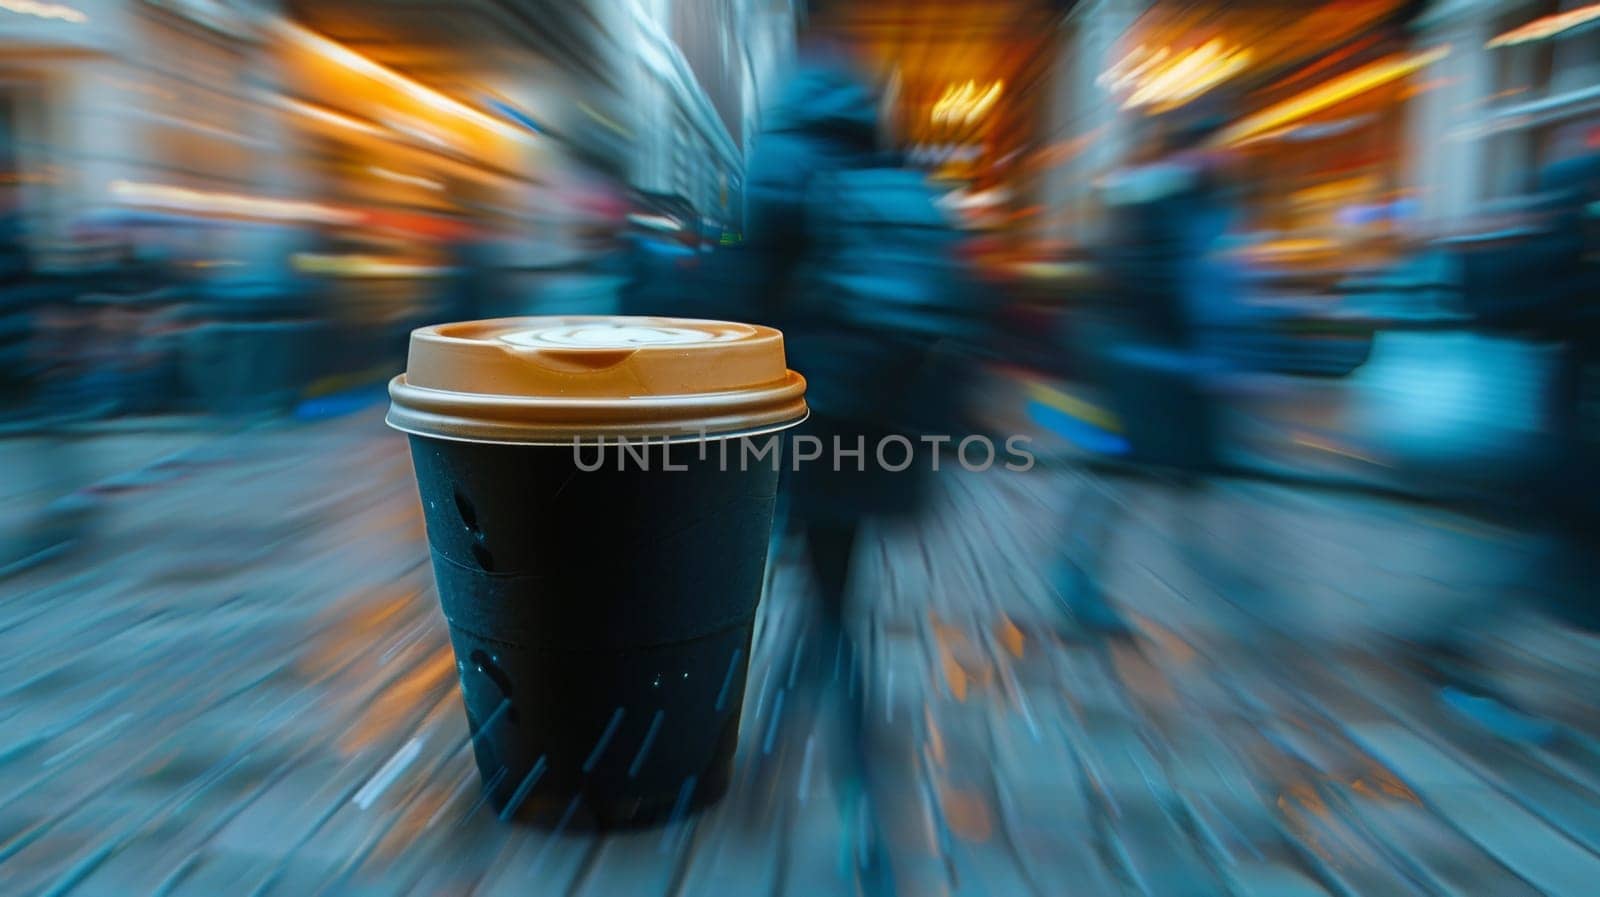 A blurry image of a coffee cup sitting on the sidewalk